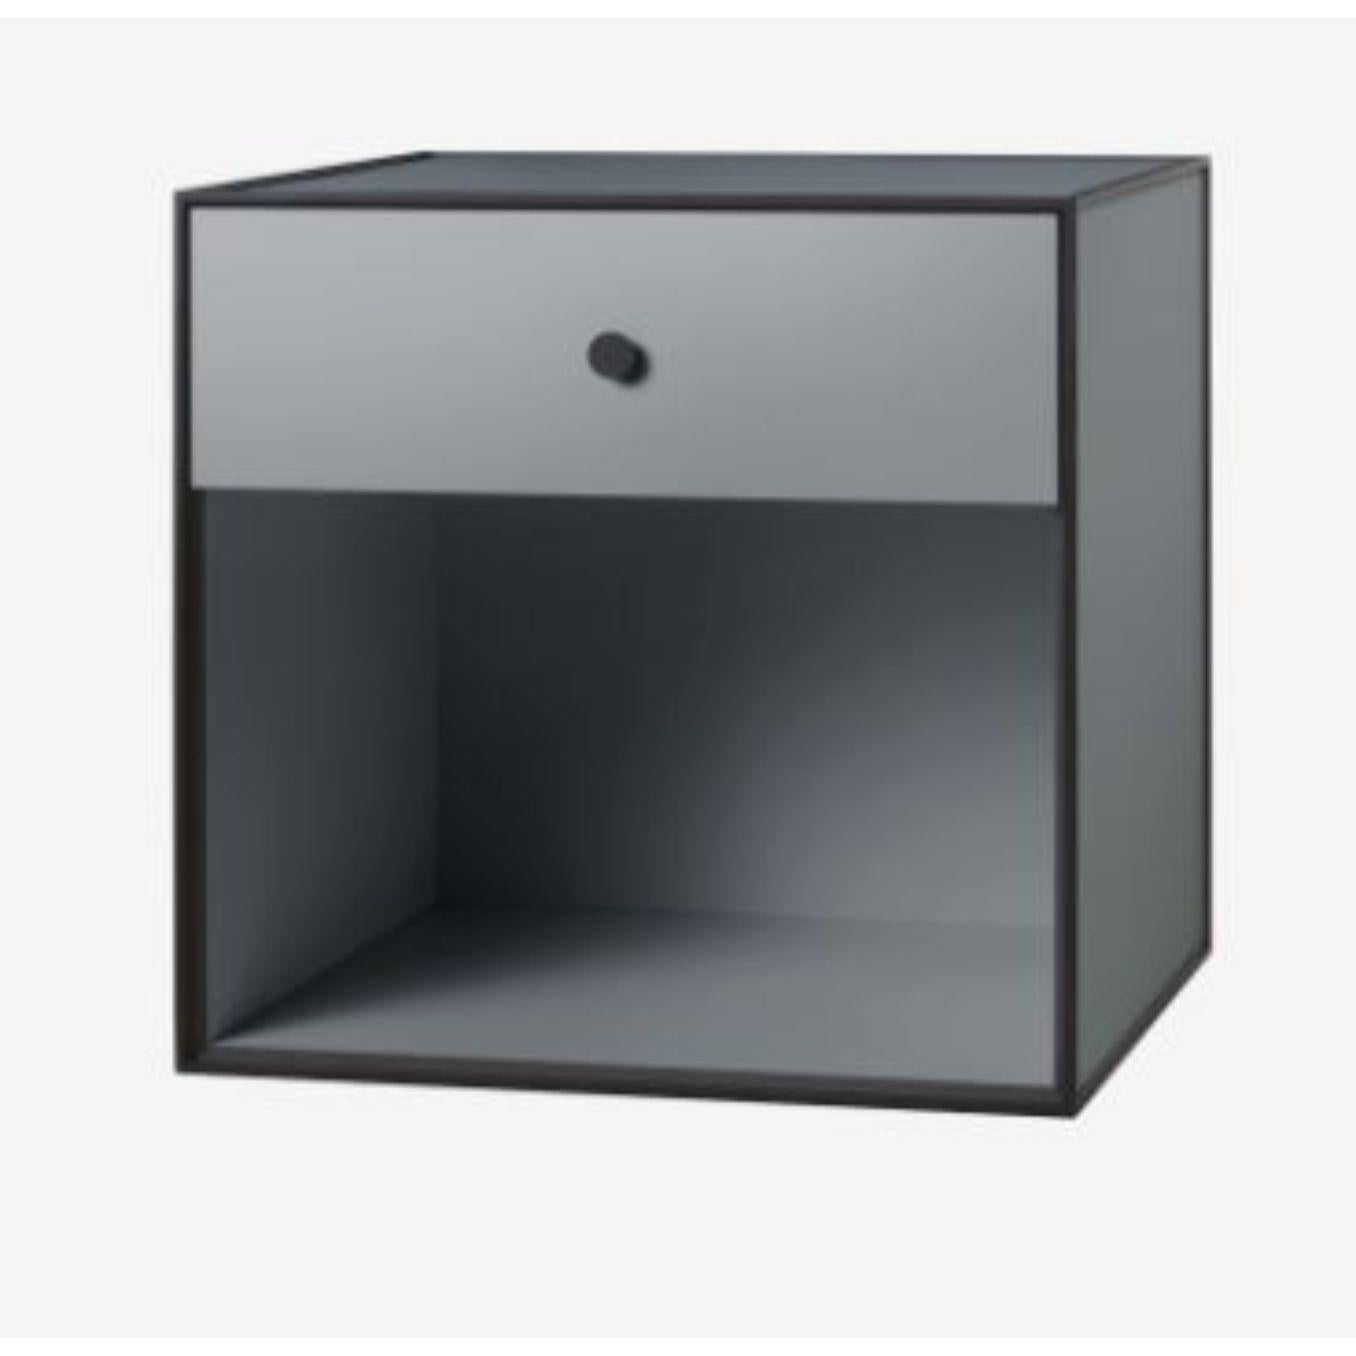 49 Dark grey frame box with 1 drawer by Lassen
Dimensions: D 49 x W 42 x H 49 cm 
Materials: finér, melamin, melamin, melamine, metal, veneer
Also available in different colours and dimensions. 
Weight: 15 Kg


By Lassen is a Danish design